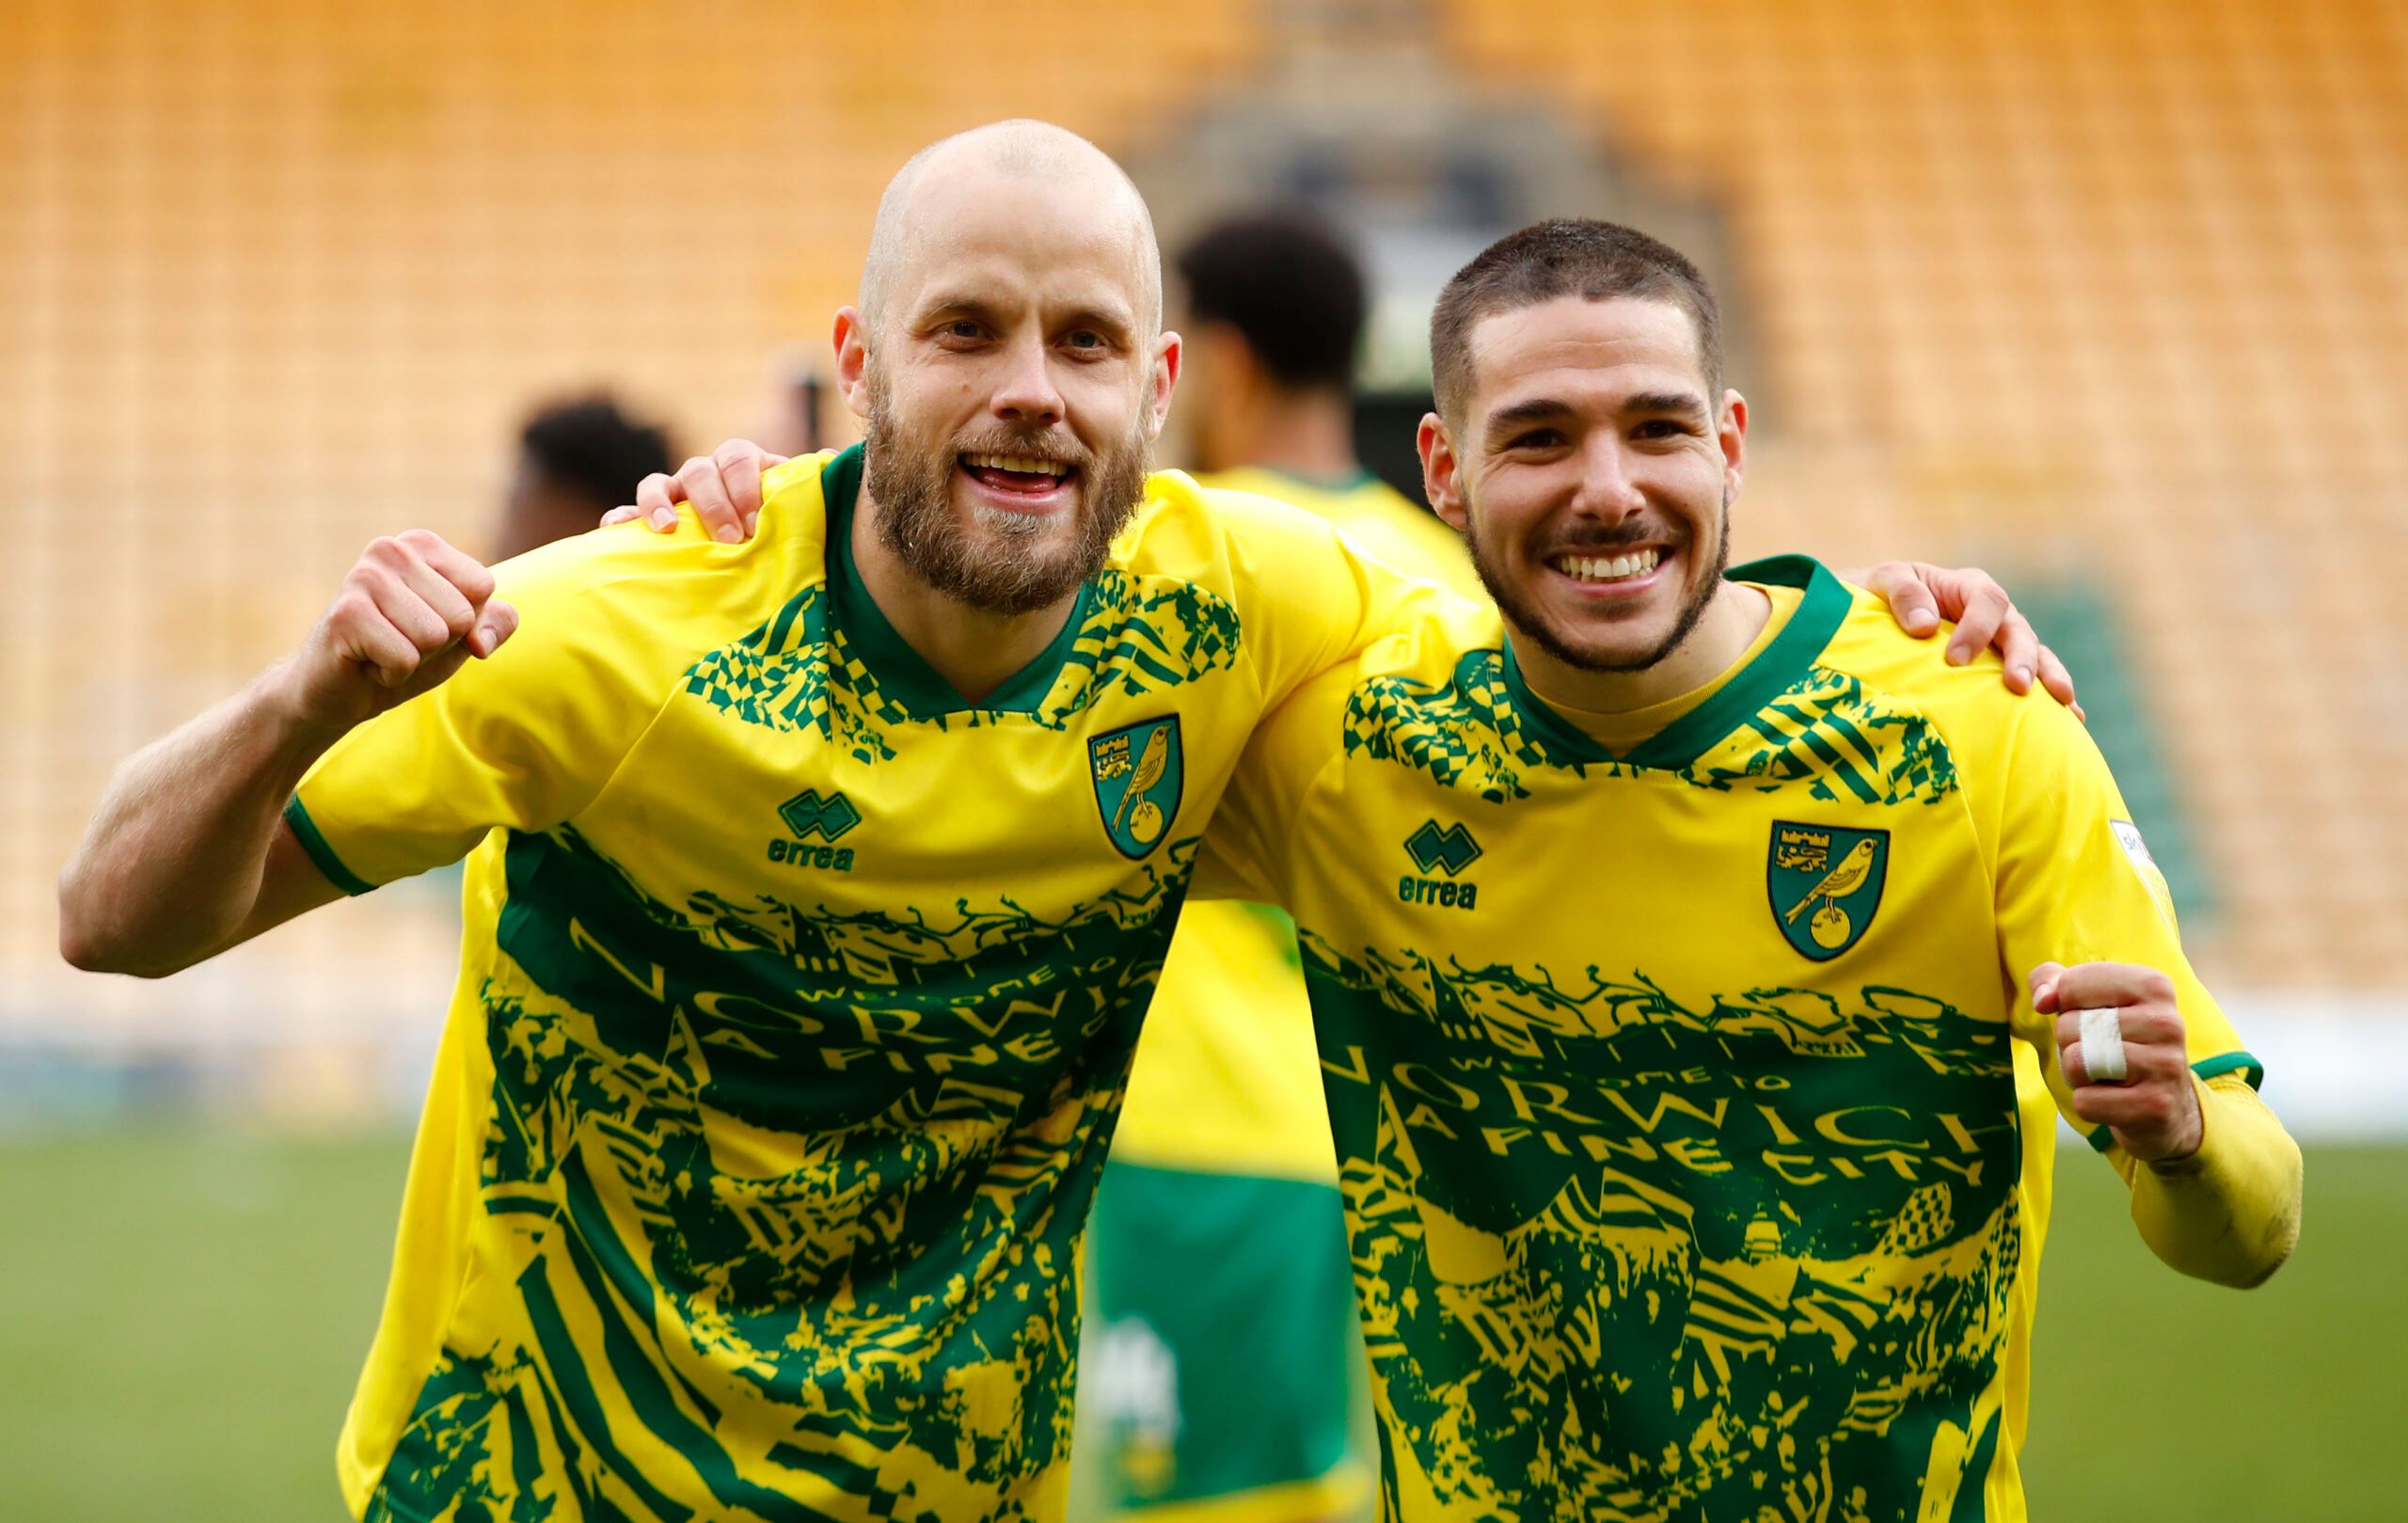 Soccer Football - Championship - Norwich City v Reading - Carrow Road, Norwich, Britain - May 1, 2021 Norwich City's Teemu Pukki and Emiliano Buendia celebrate after winning the Championship Action Images via Reuters/Andrew Boyers EDITORIAL USE ONLY. No use with unauthorized audio, video, data, fixture lists, club/league logos or 'live' services. Online in-match use limited to 75 images, no video emulation. No use in betting, games or single club /league/player publications.  Please contact your